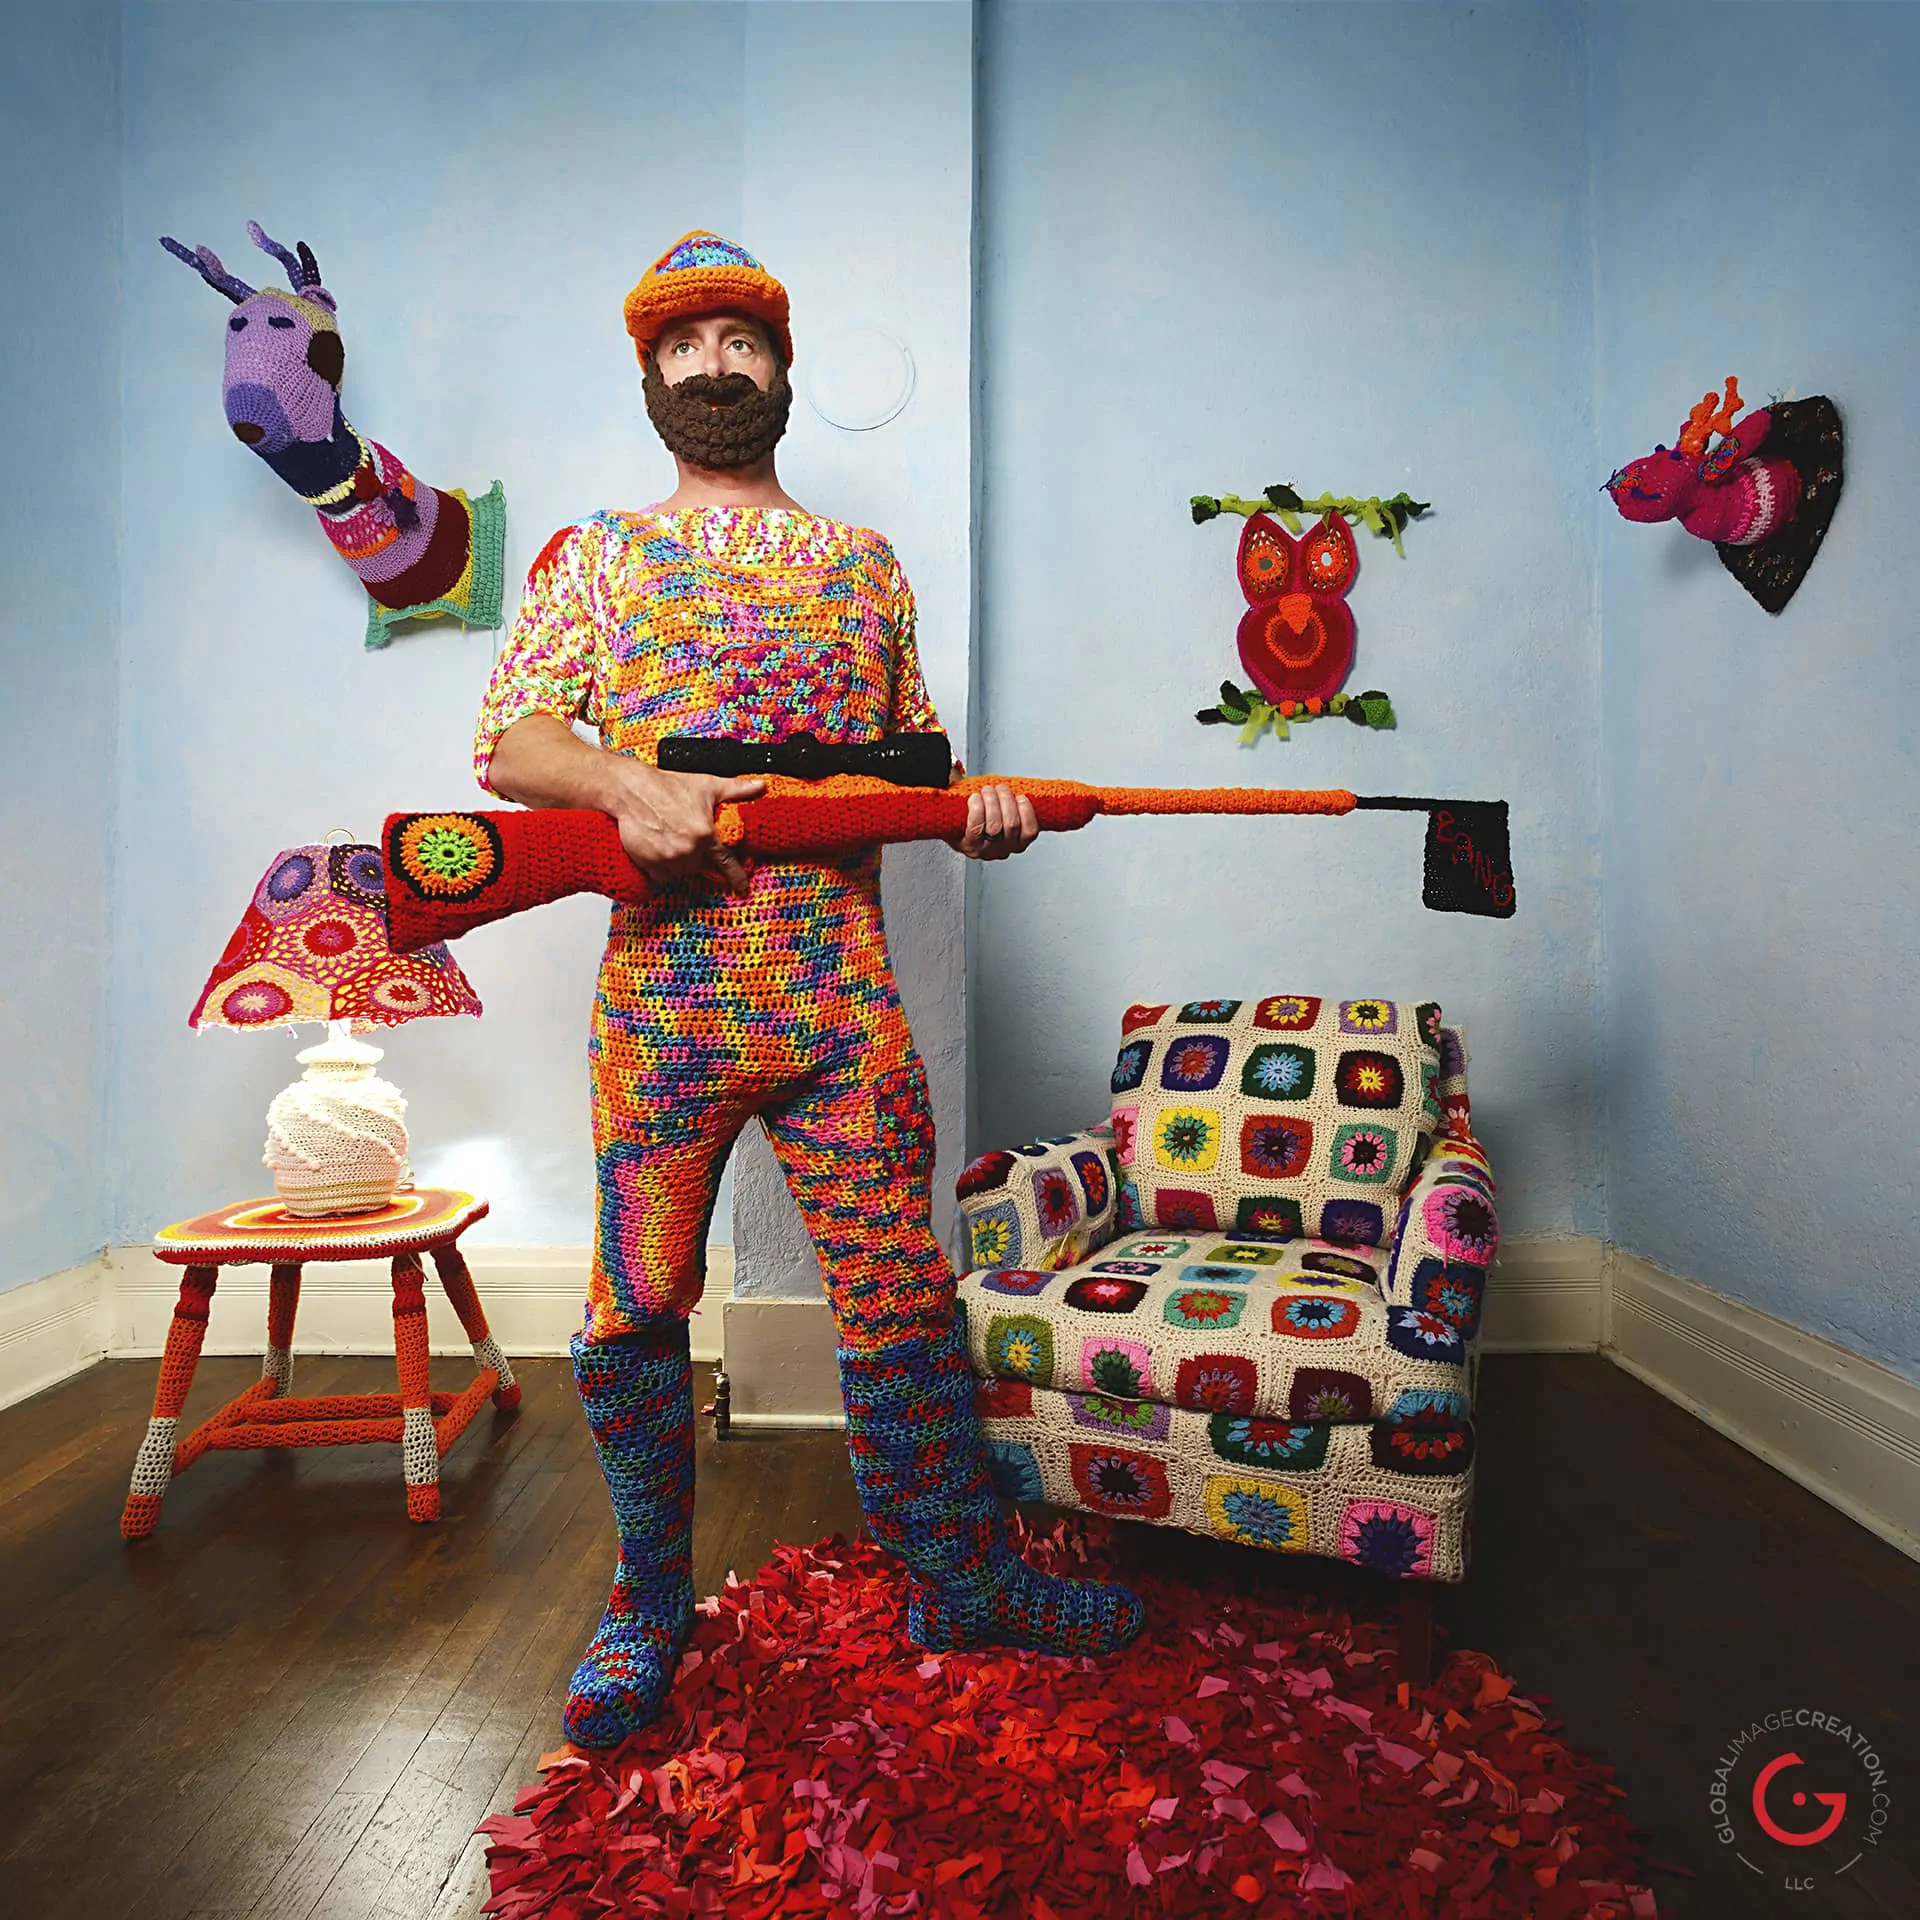 Yarn Hunter - Yarnography - Colorful Characters in Crochet Art by Gina Gallina - Photography Concepts by Jeremy Mason McGraw